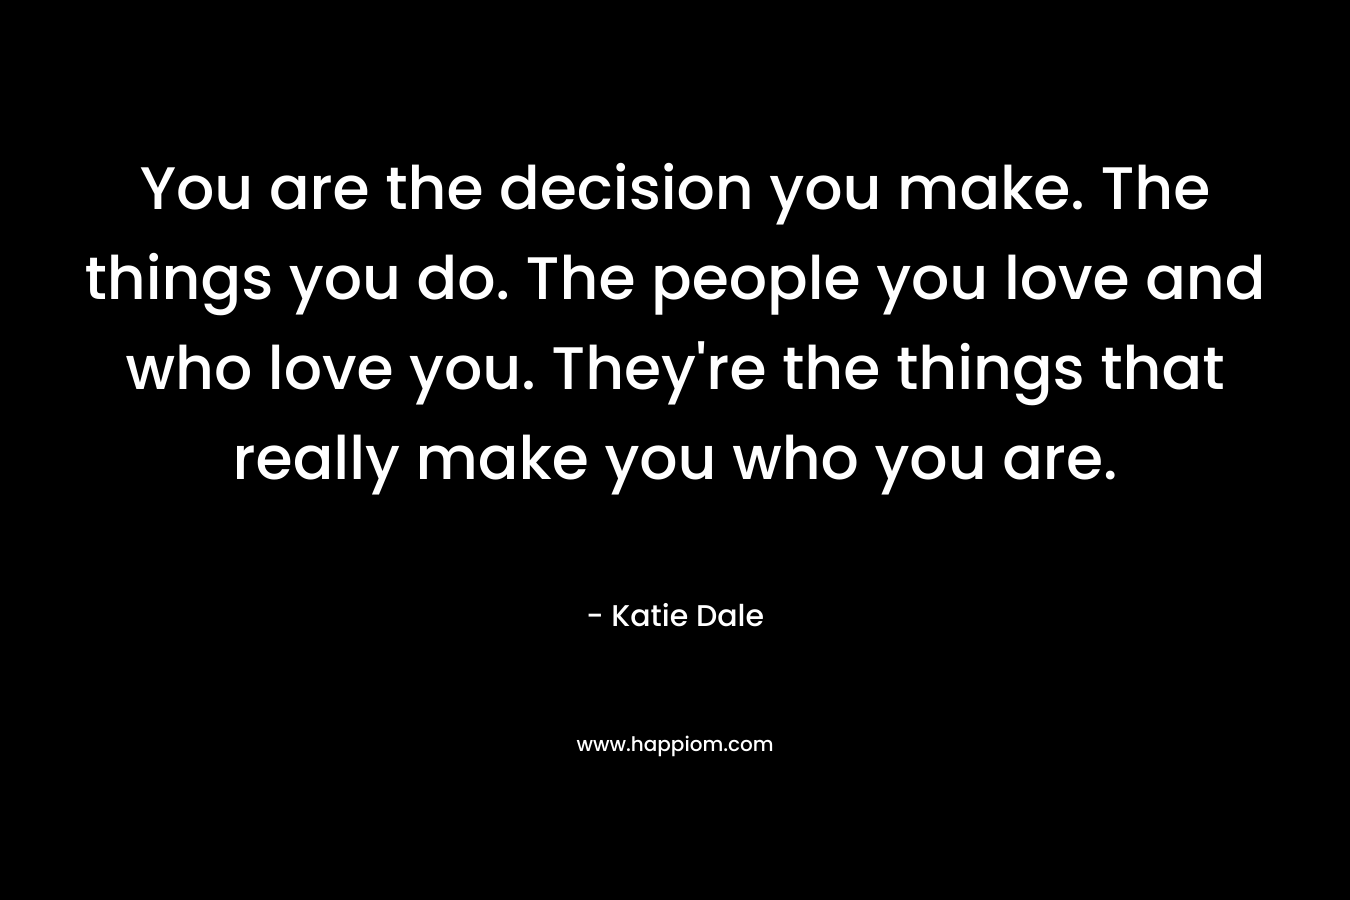 You are the decision you make. The things you do. The people you love and who love you. They're the things that really make you who you are.